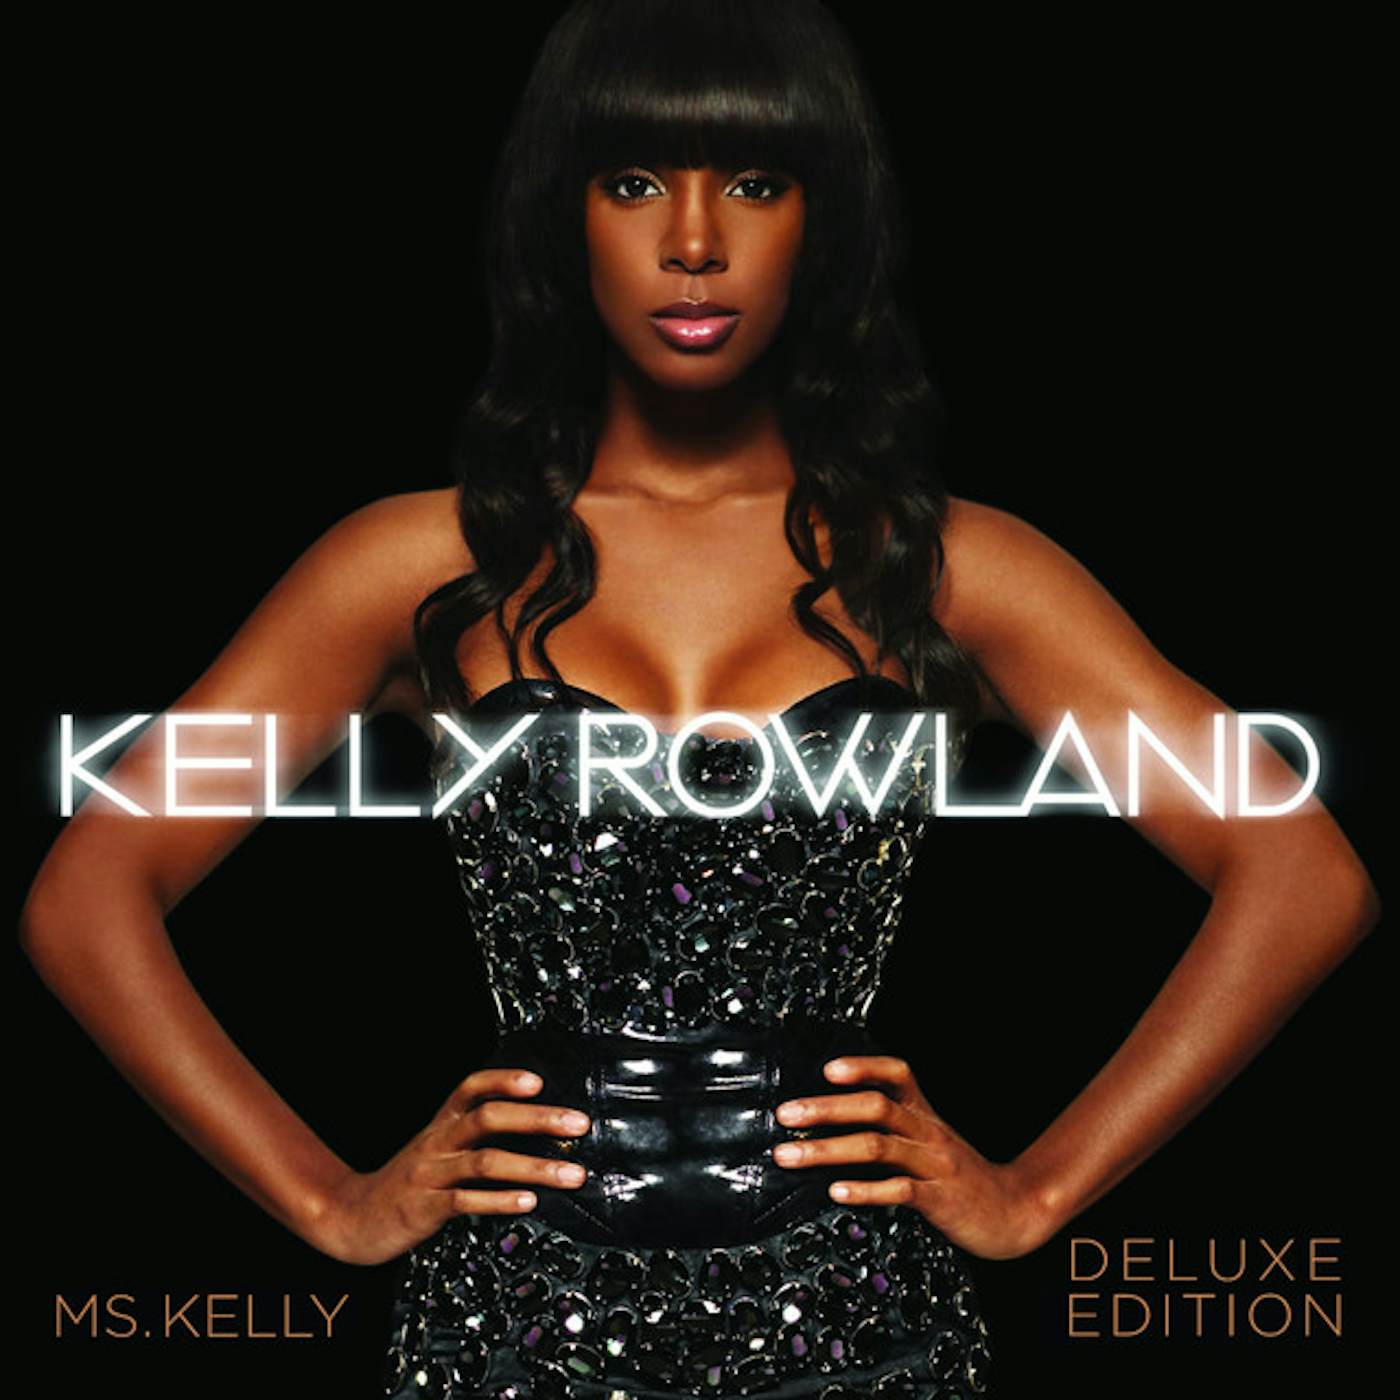 Kelly Rowland MS KELLY - DELUXE EDITION CD